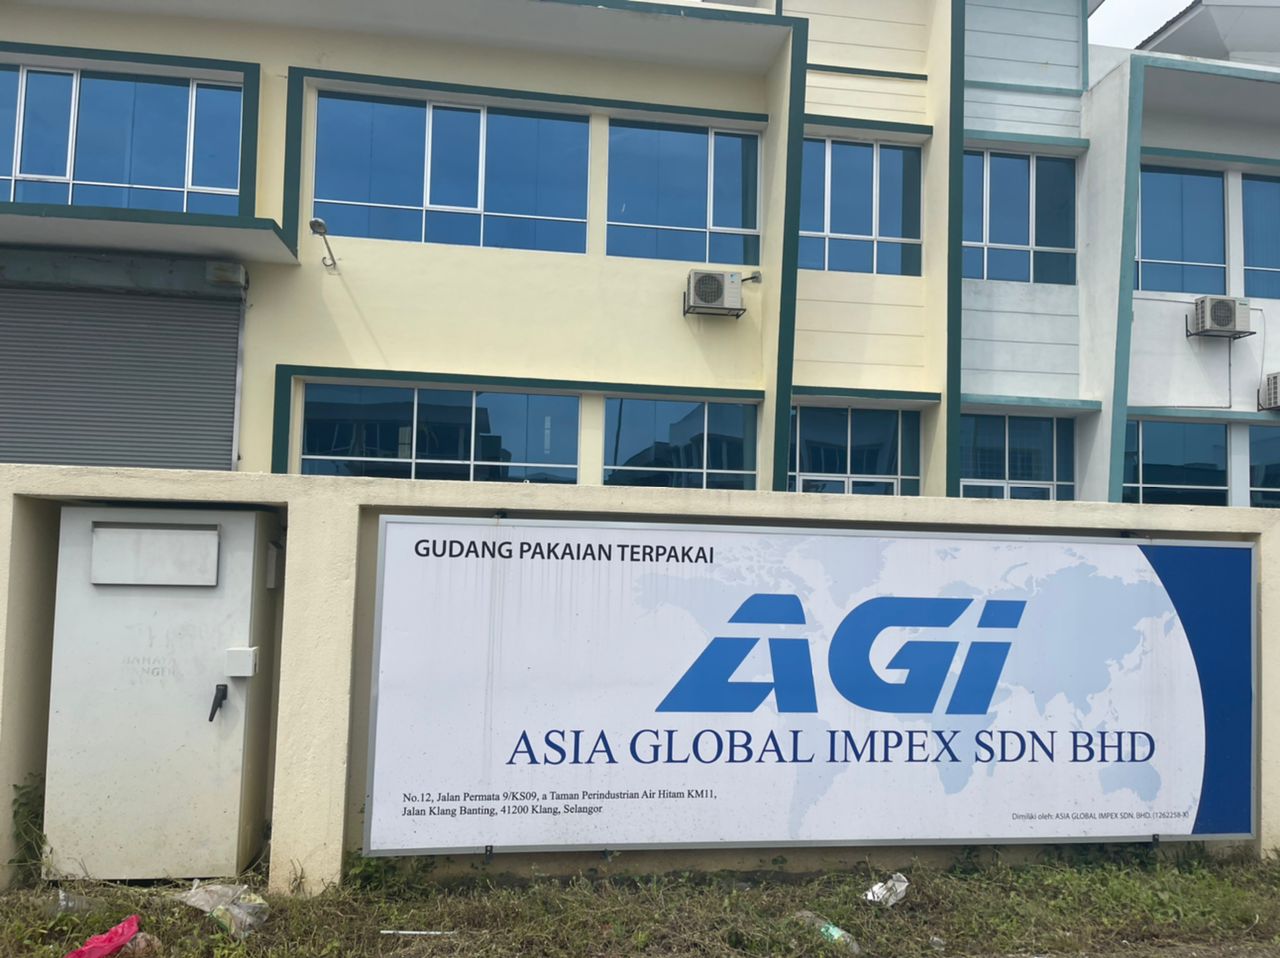 ASIA GLOBAL IMPEX SDN. BHD.